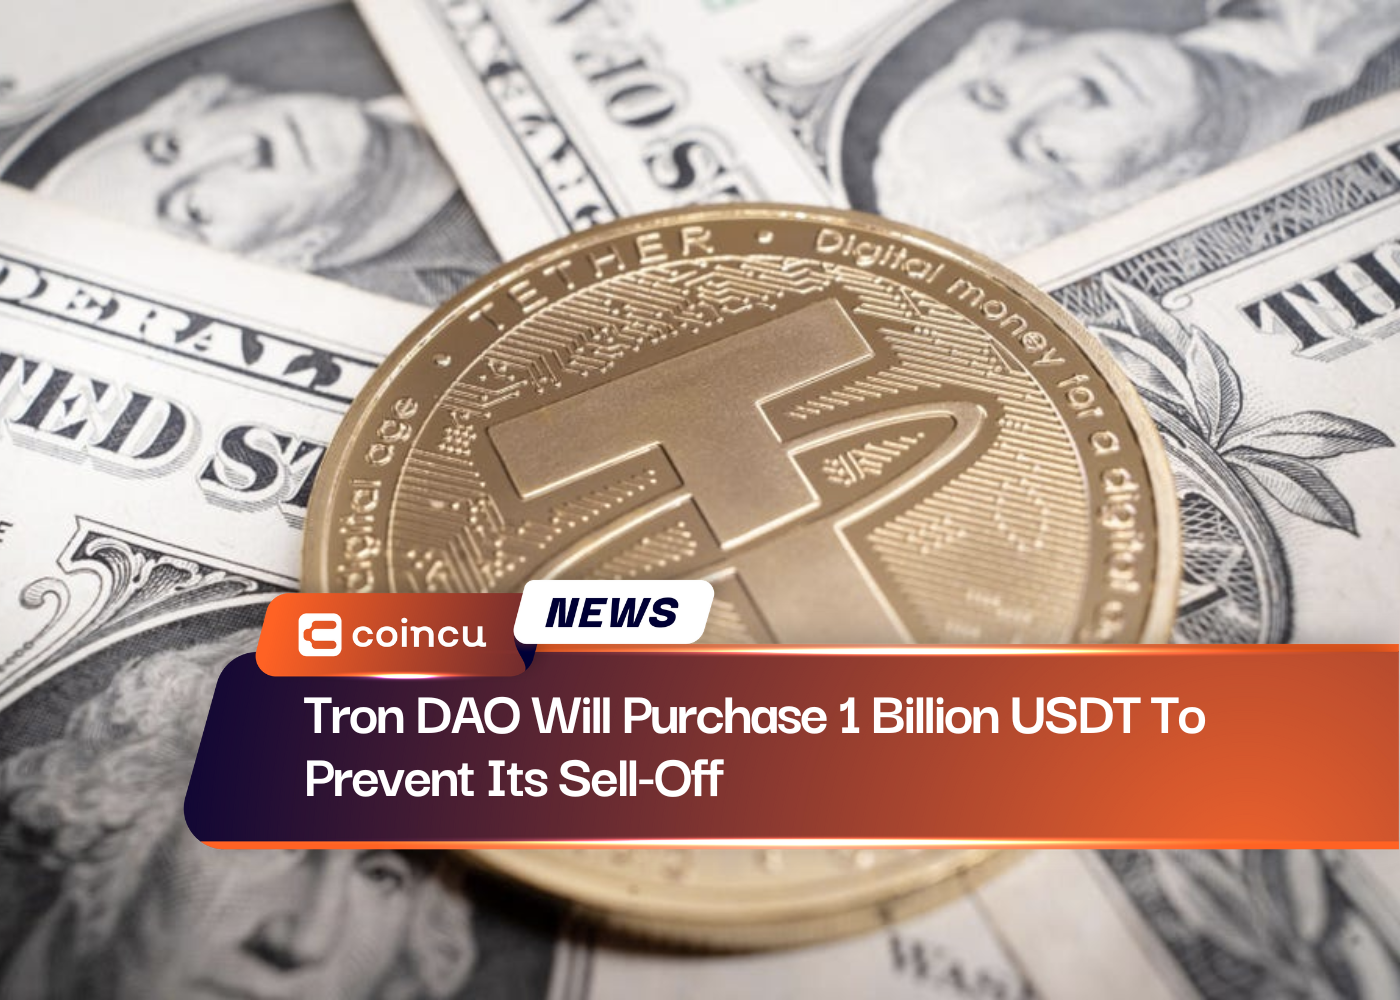 Tron DAO Will Purchase 1 Billion USDT To Prevent Its Sell-Off